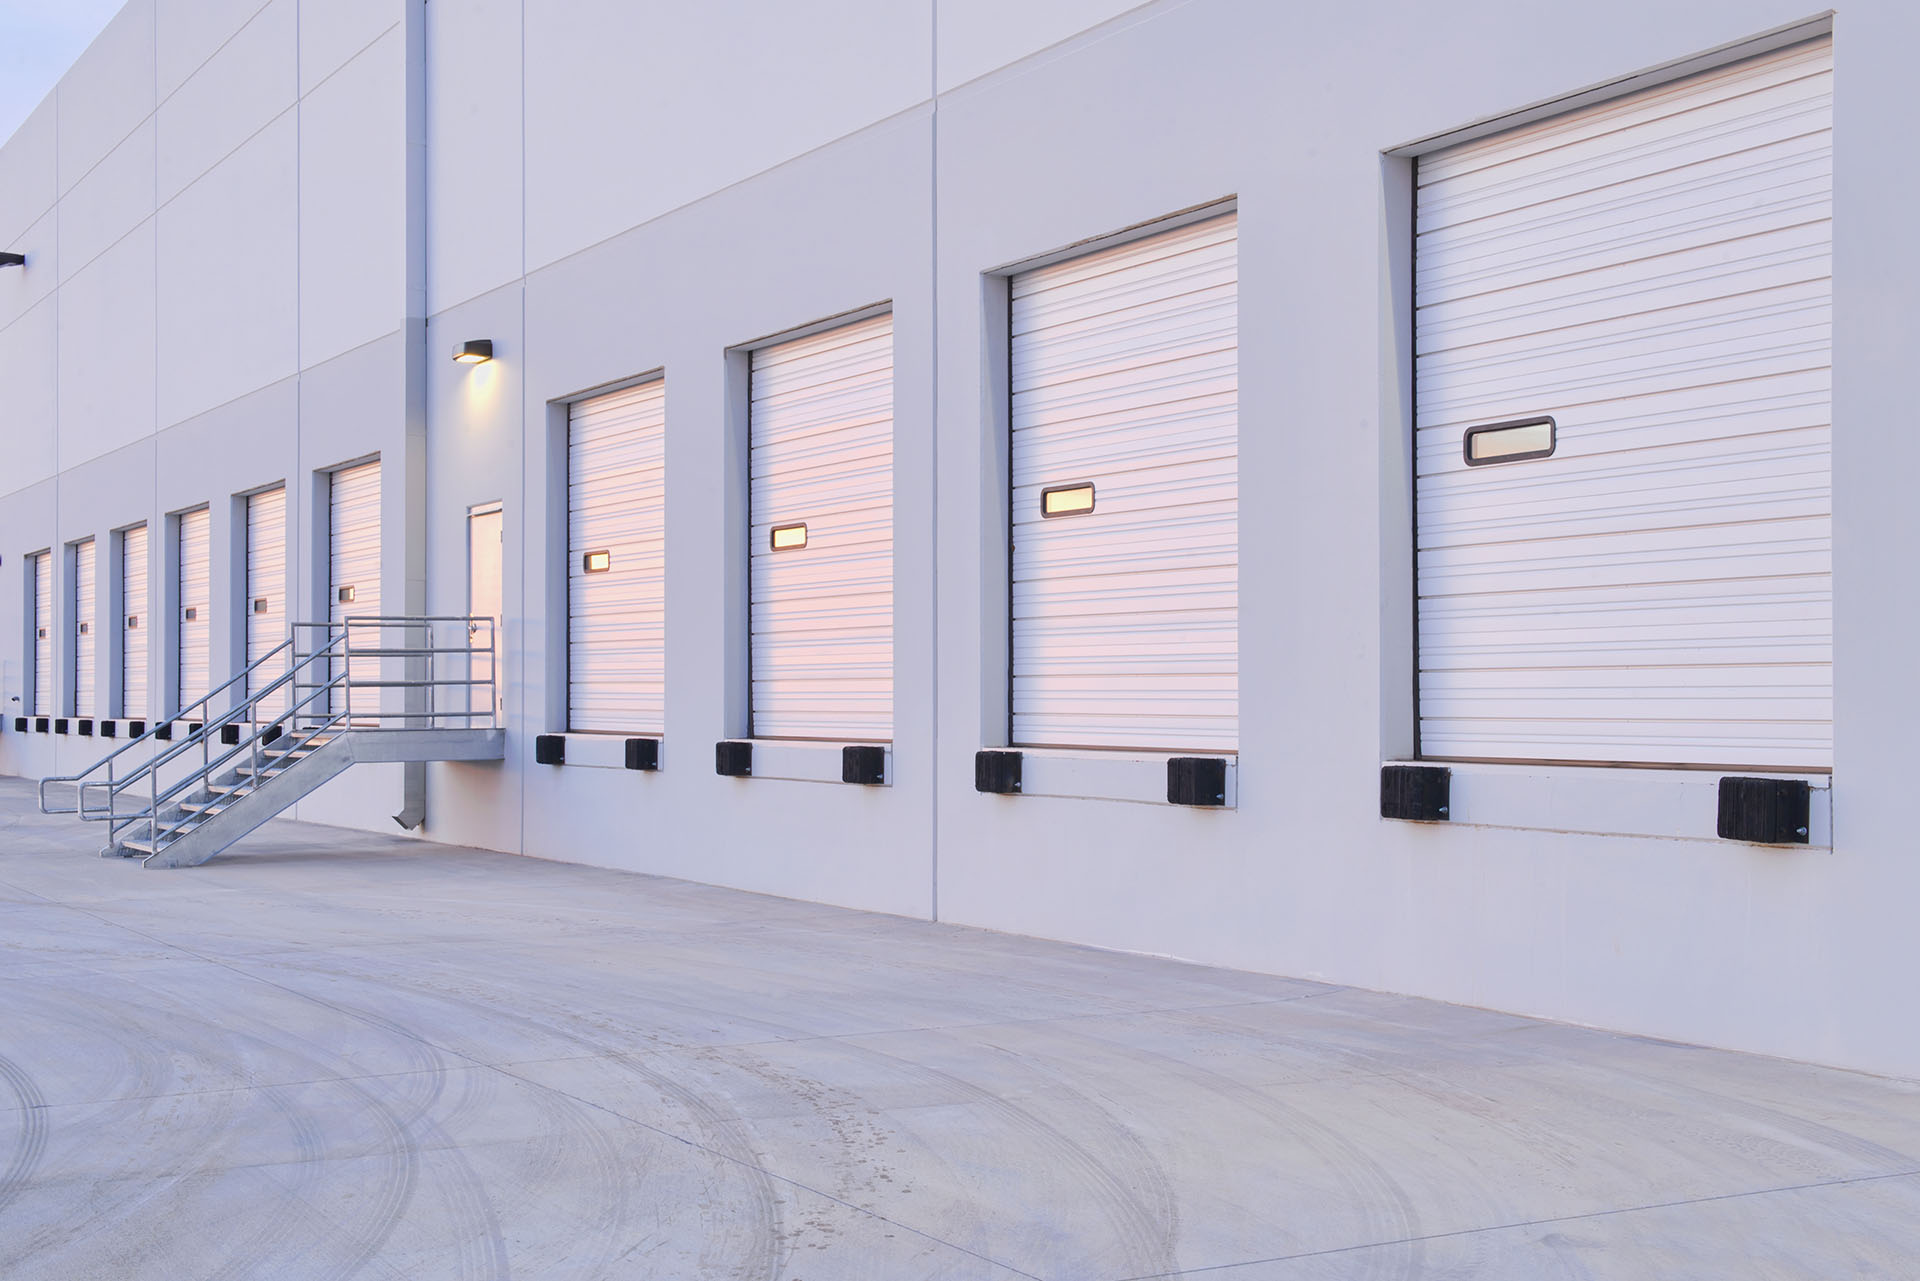 Commercial and industrial garage door sales and installation service in Montreal, Laval and on the North Shore - Porte de Garage Montreal - Portes-de-Garage-Supérieur located in Ville Saint-Laurent